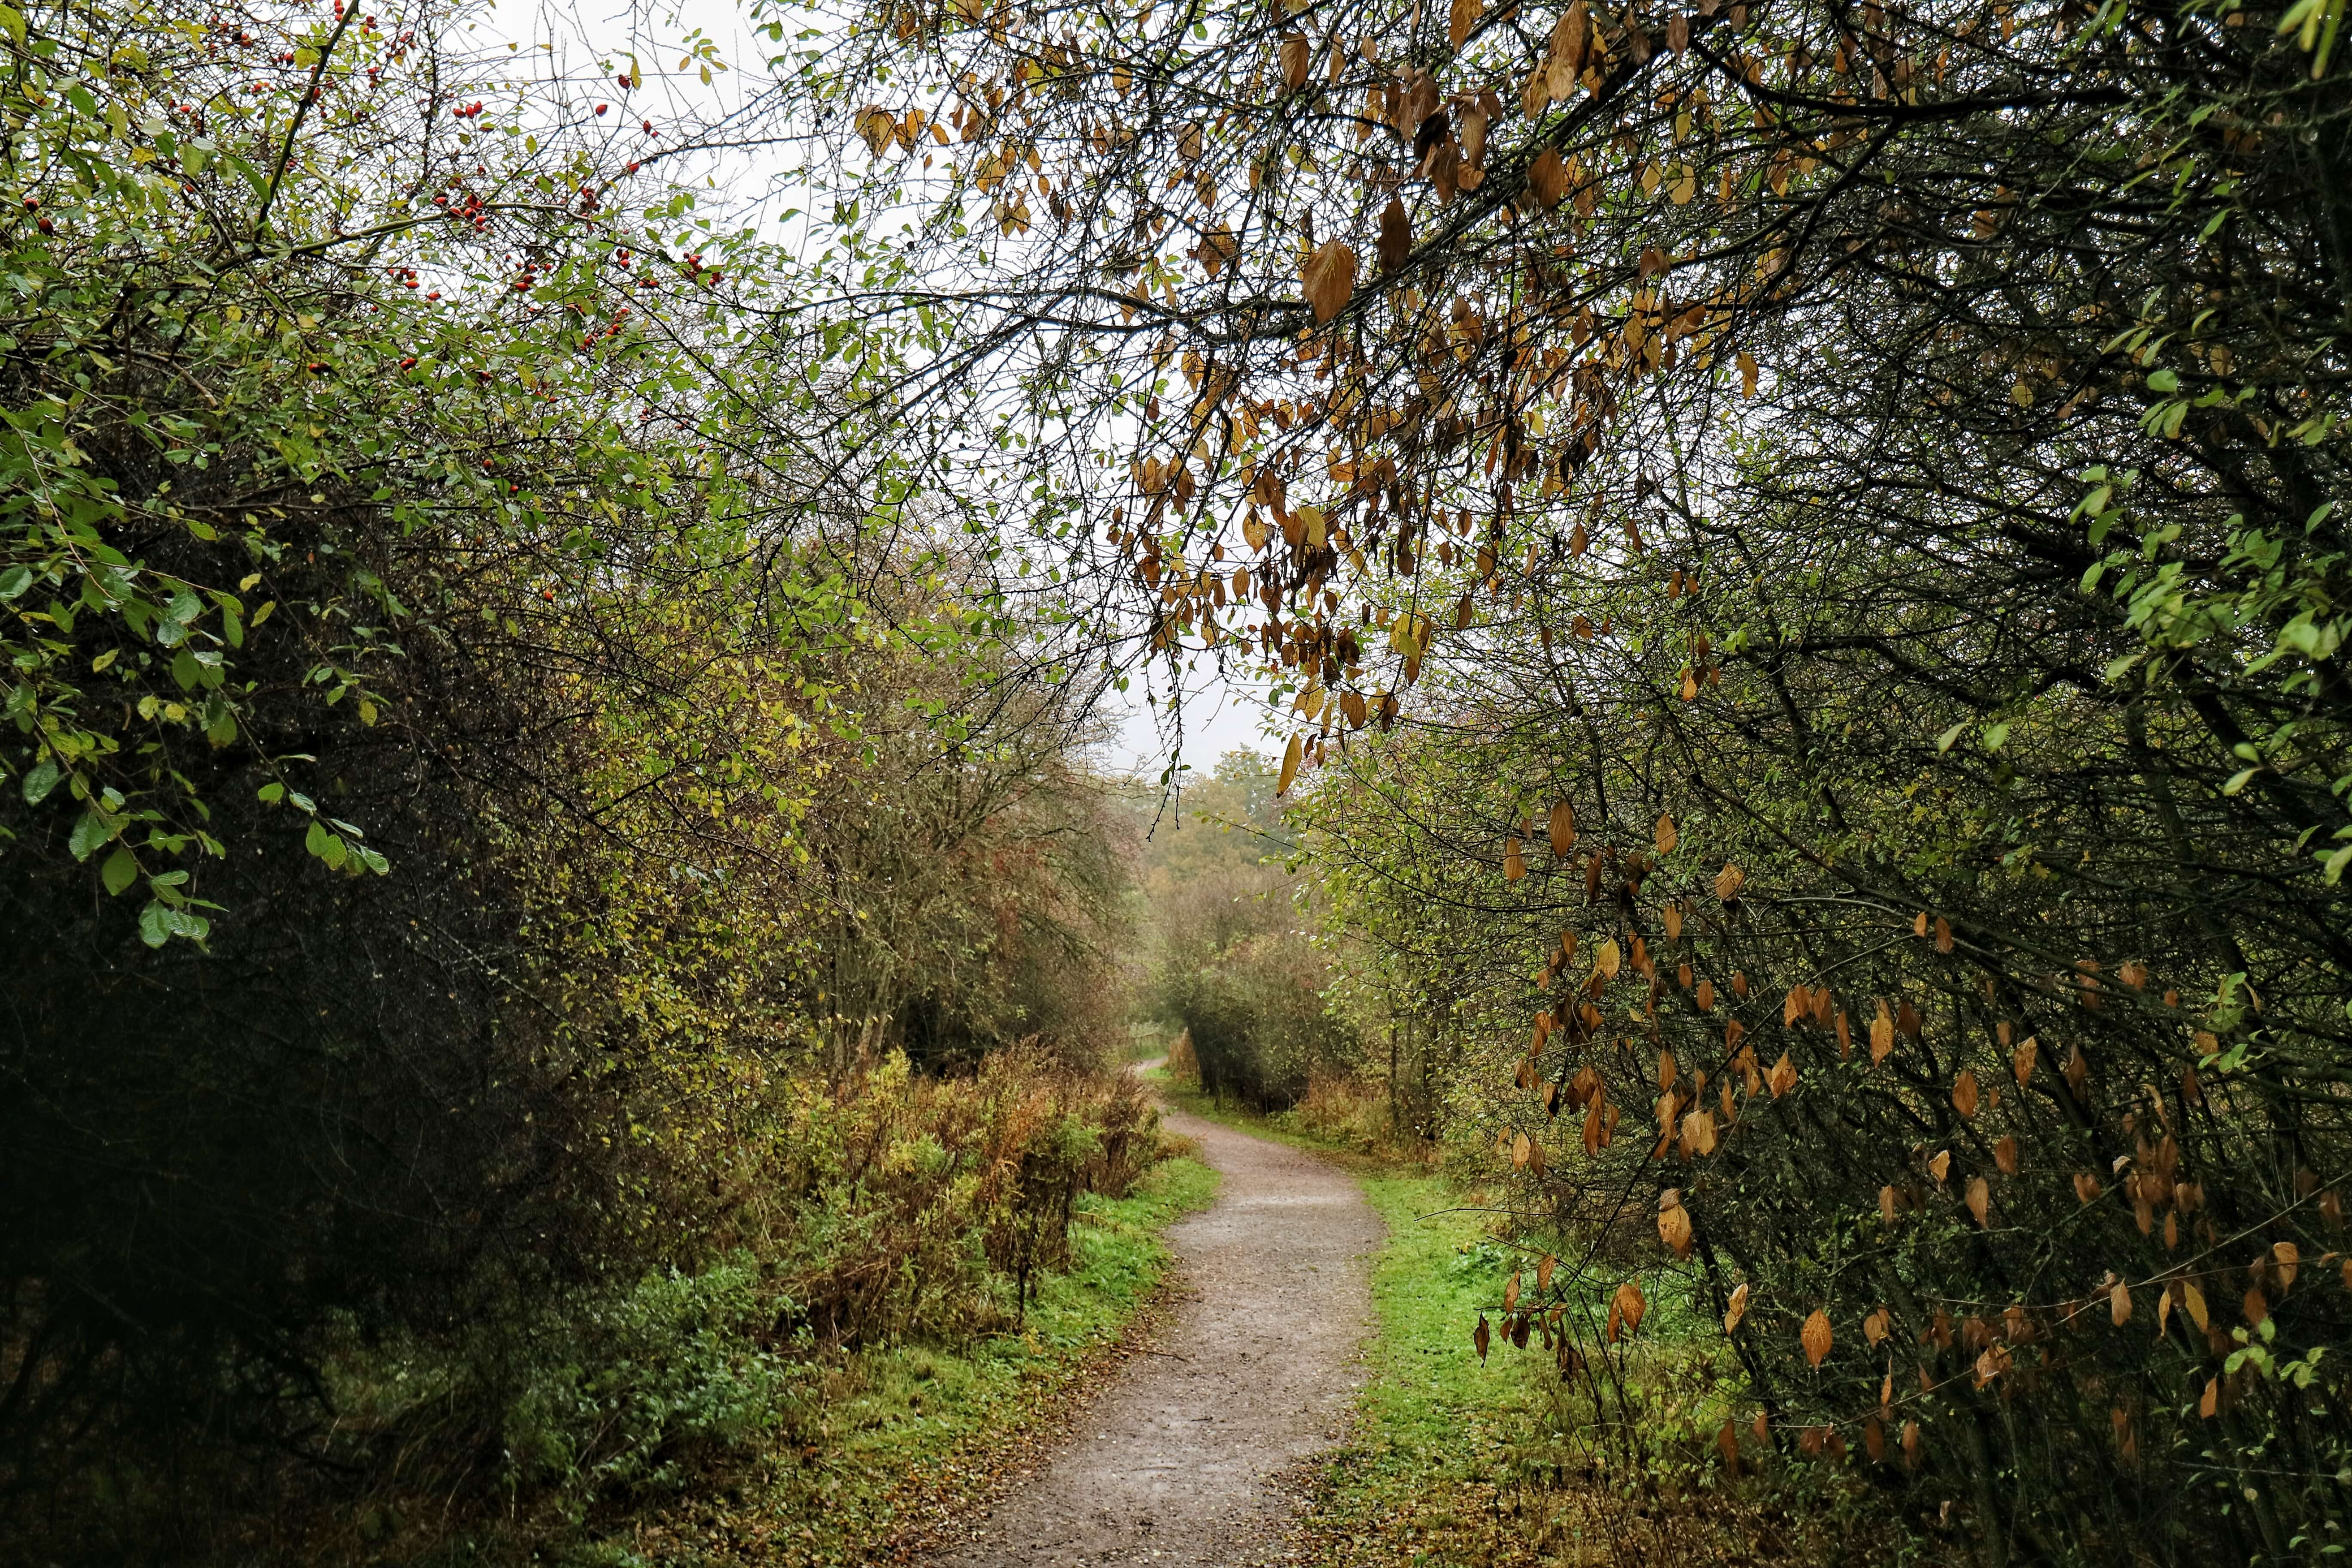 A path heading through trees and high hedges